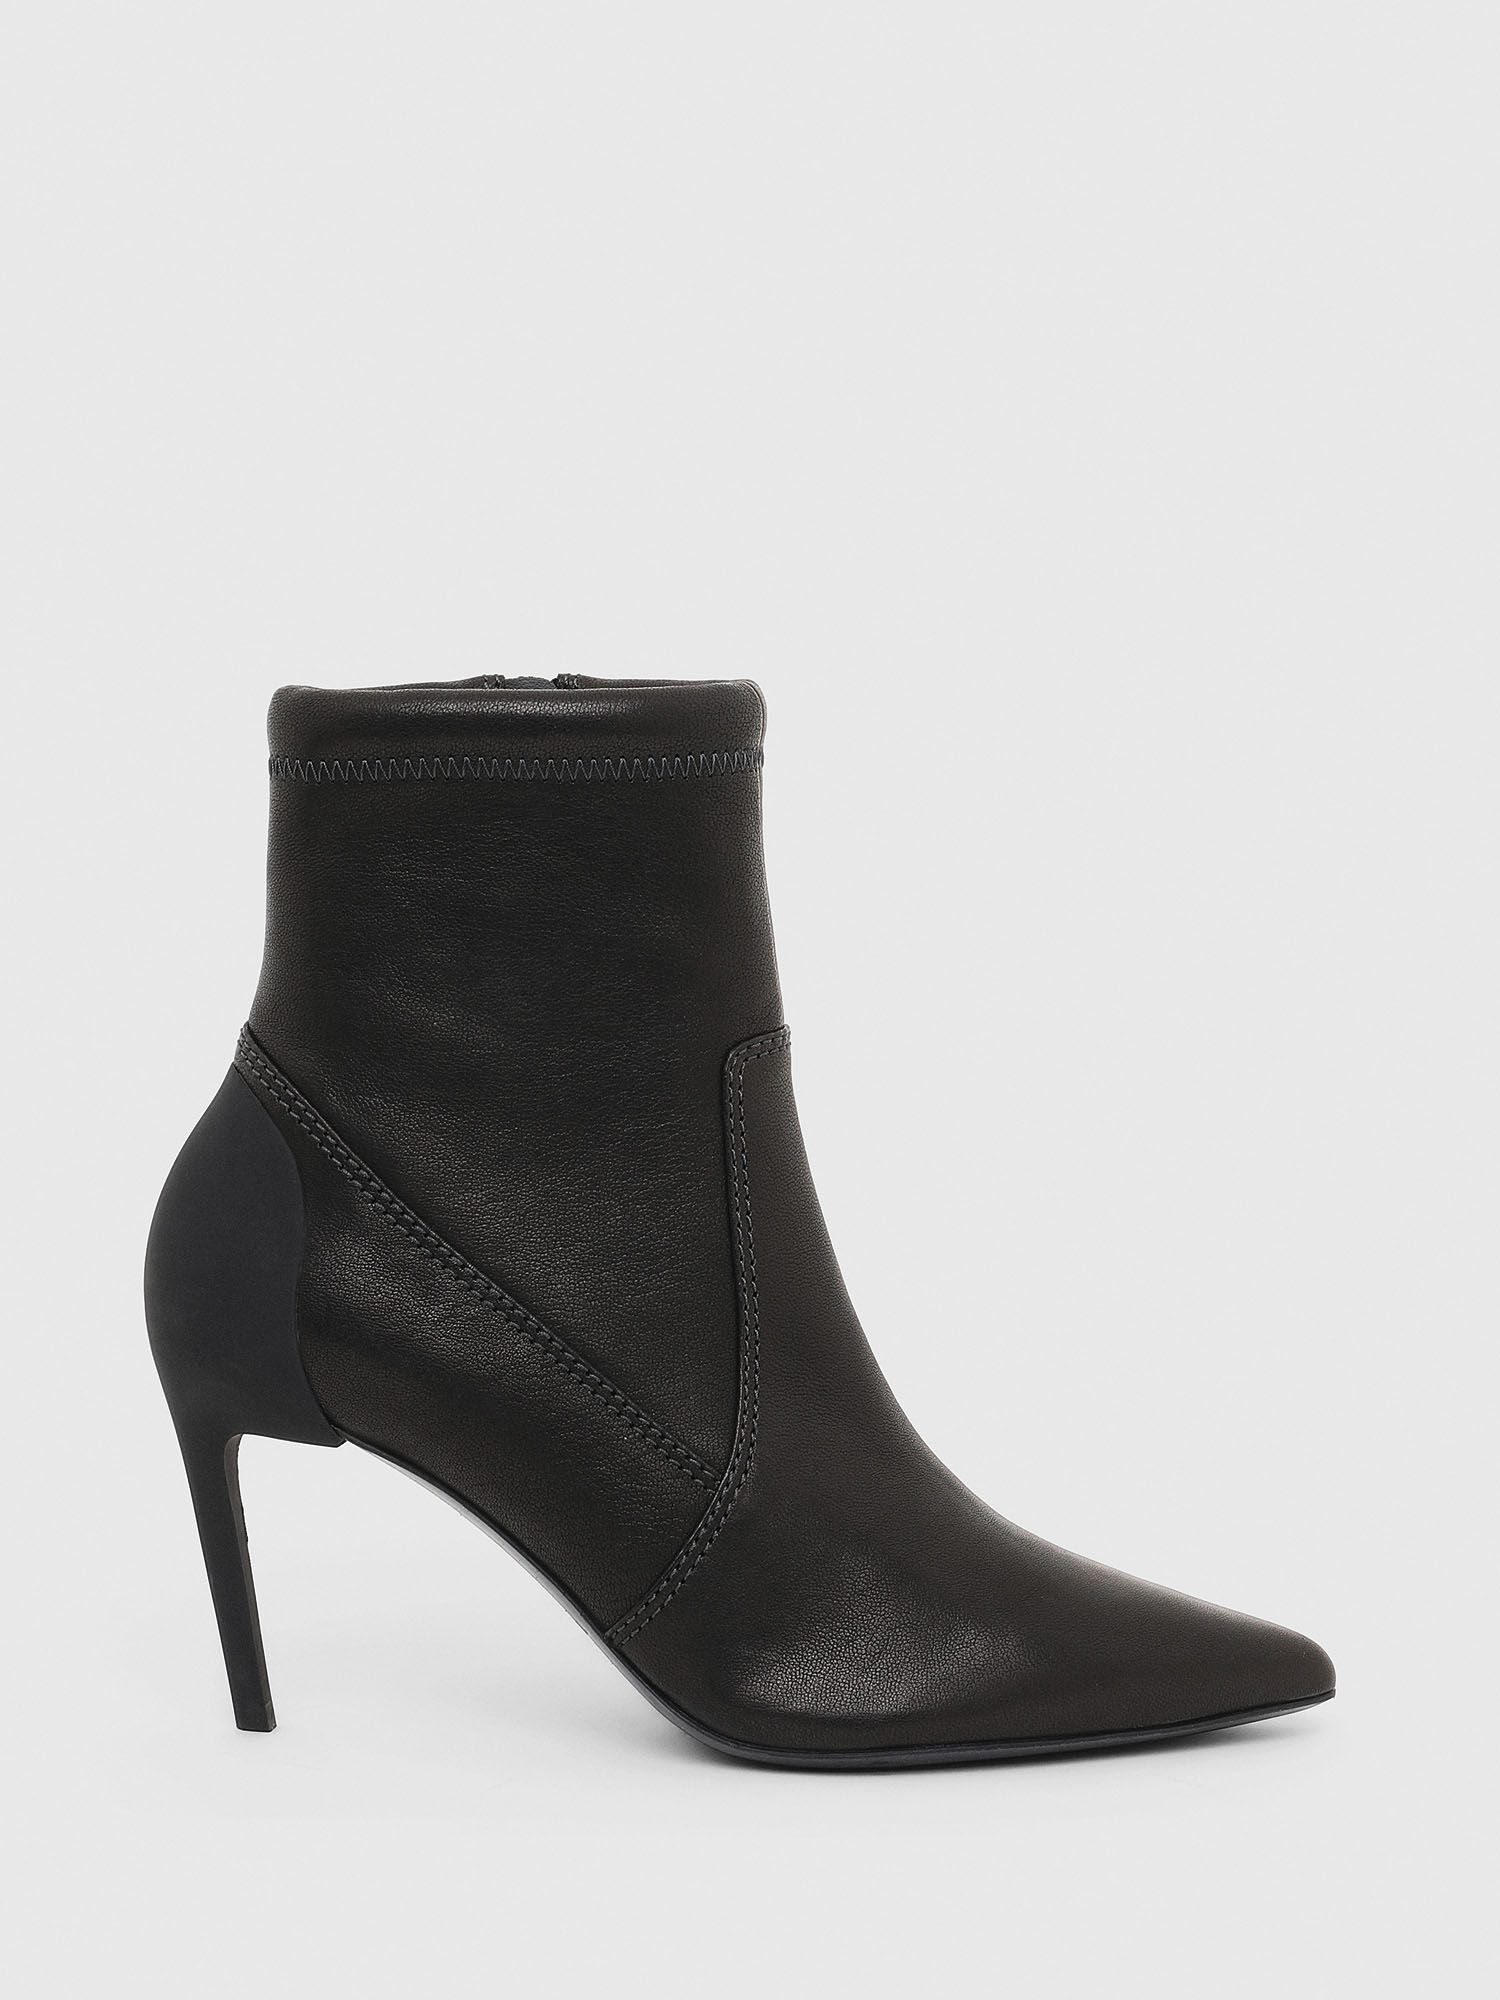 shiny black ankle boots